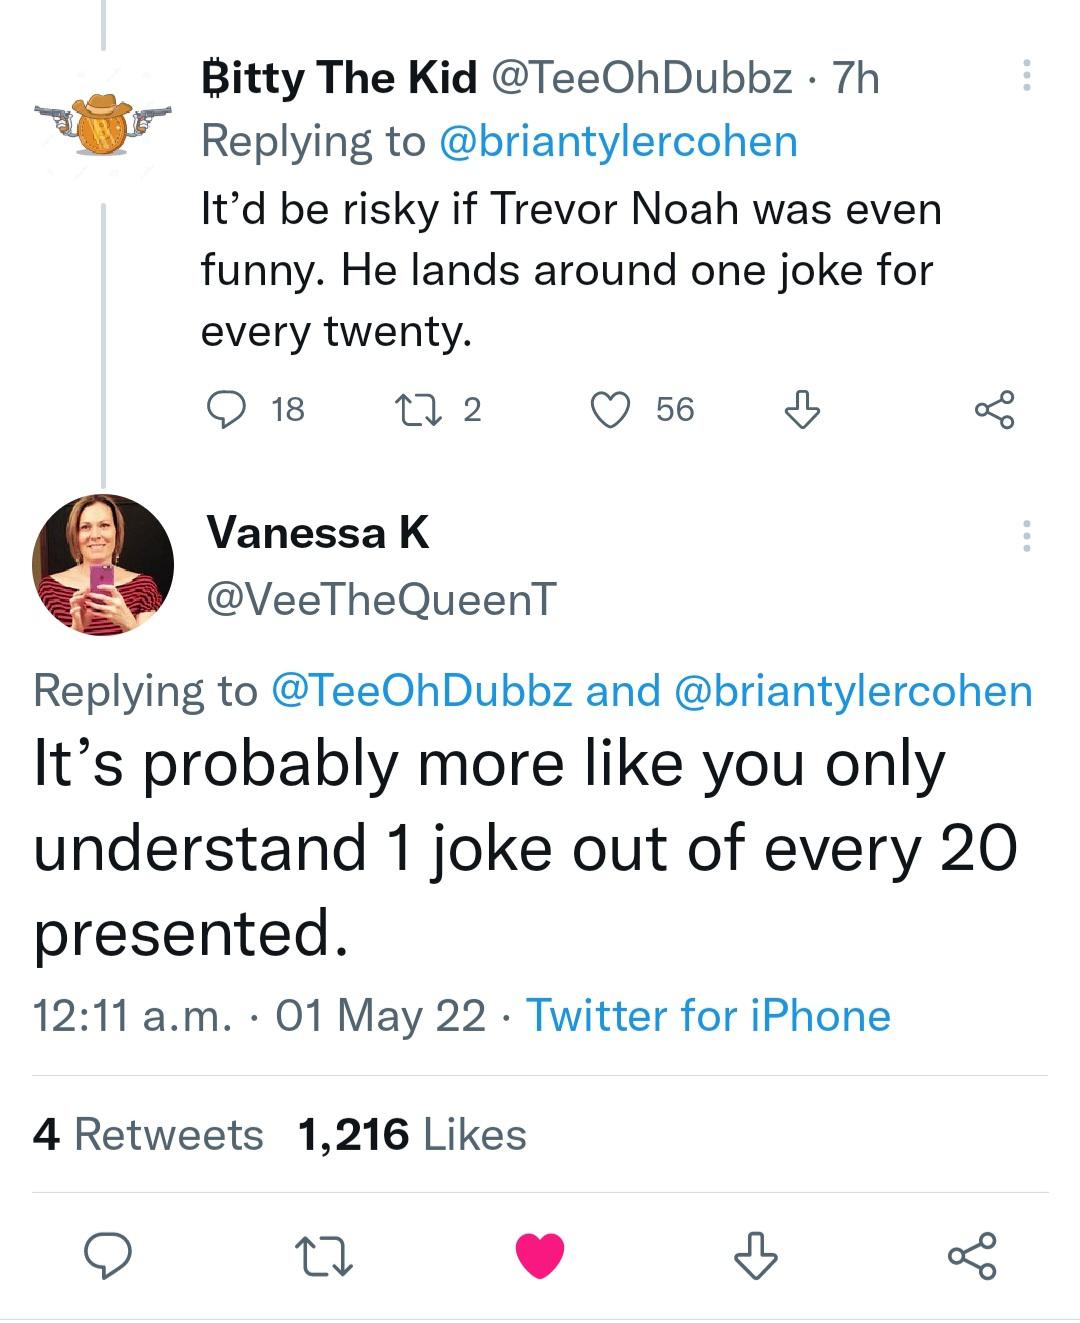 savage clapbacks - point - Bitty The Kid 7h It'd be risky if Trevor Noah was even funny. He lands around one joke for every twenty. 18 27 2 56 8 Vanessa K QueenT and It's probably more you only understand 1 joke out of every 20 presented. a.m. 01 May 22 T